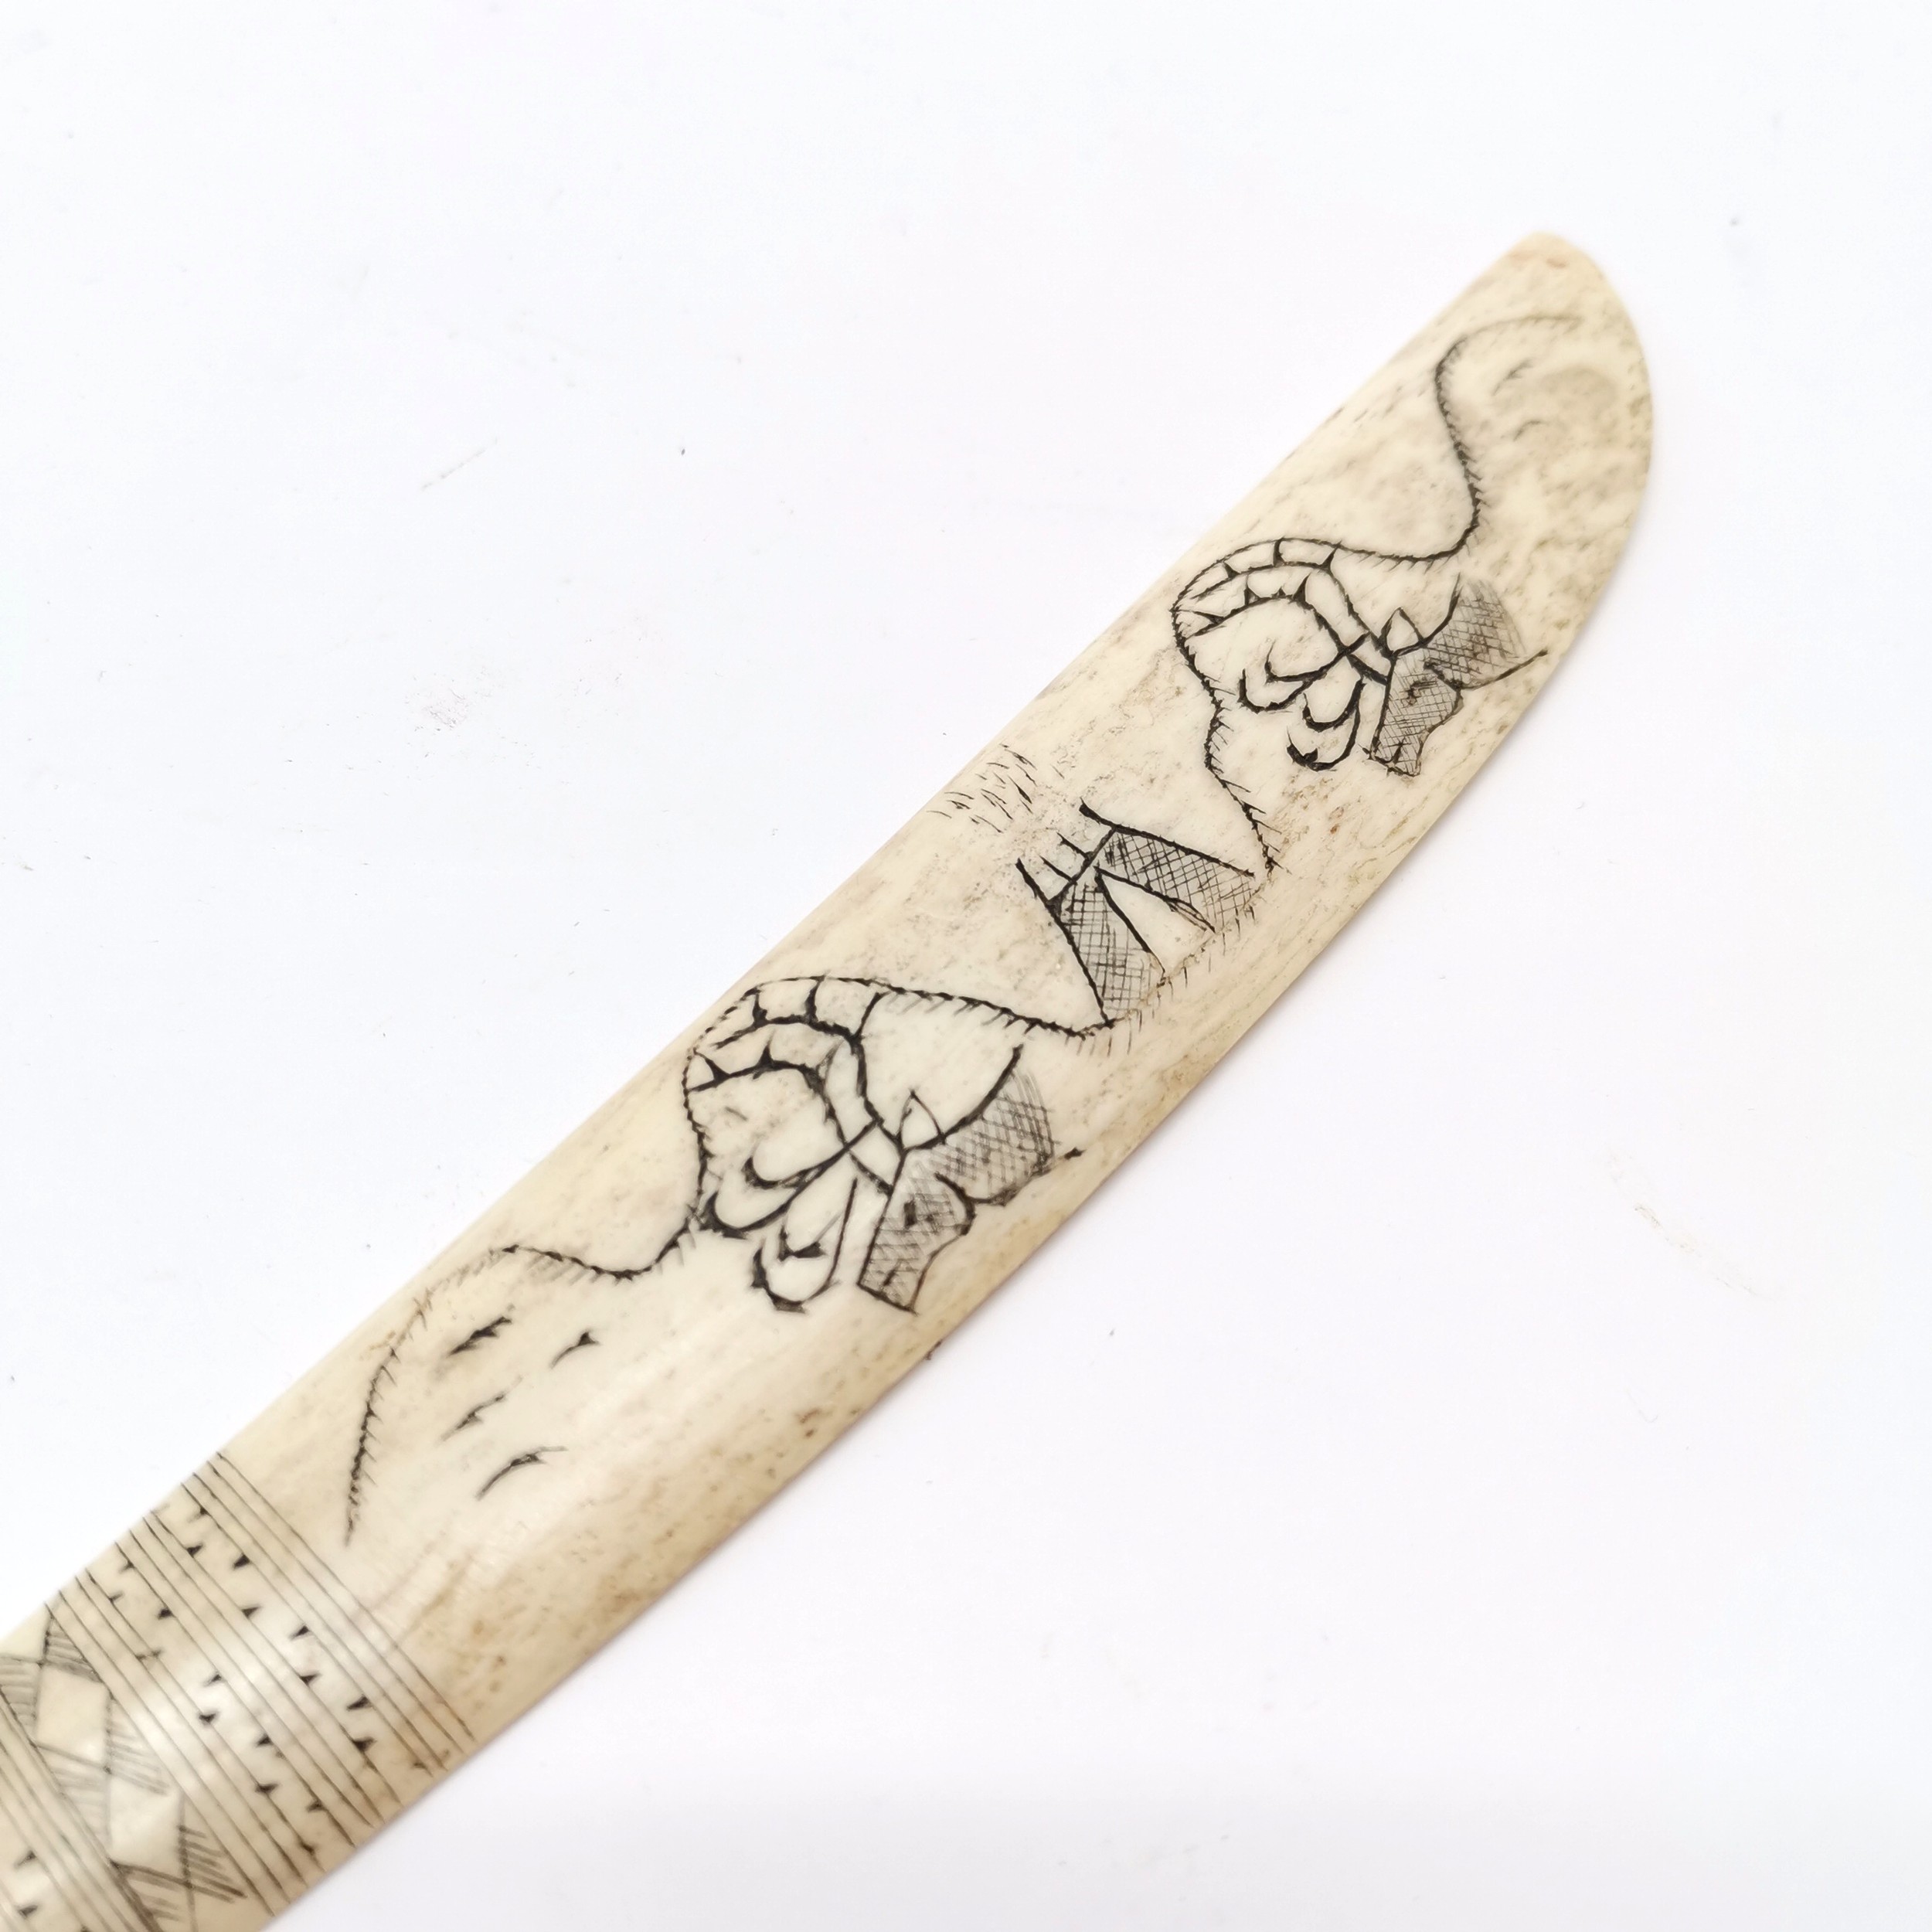 Inuit scrimshaw carved bone scraping knife with carabou & tent detail - 24cm long - Image 2 of 3